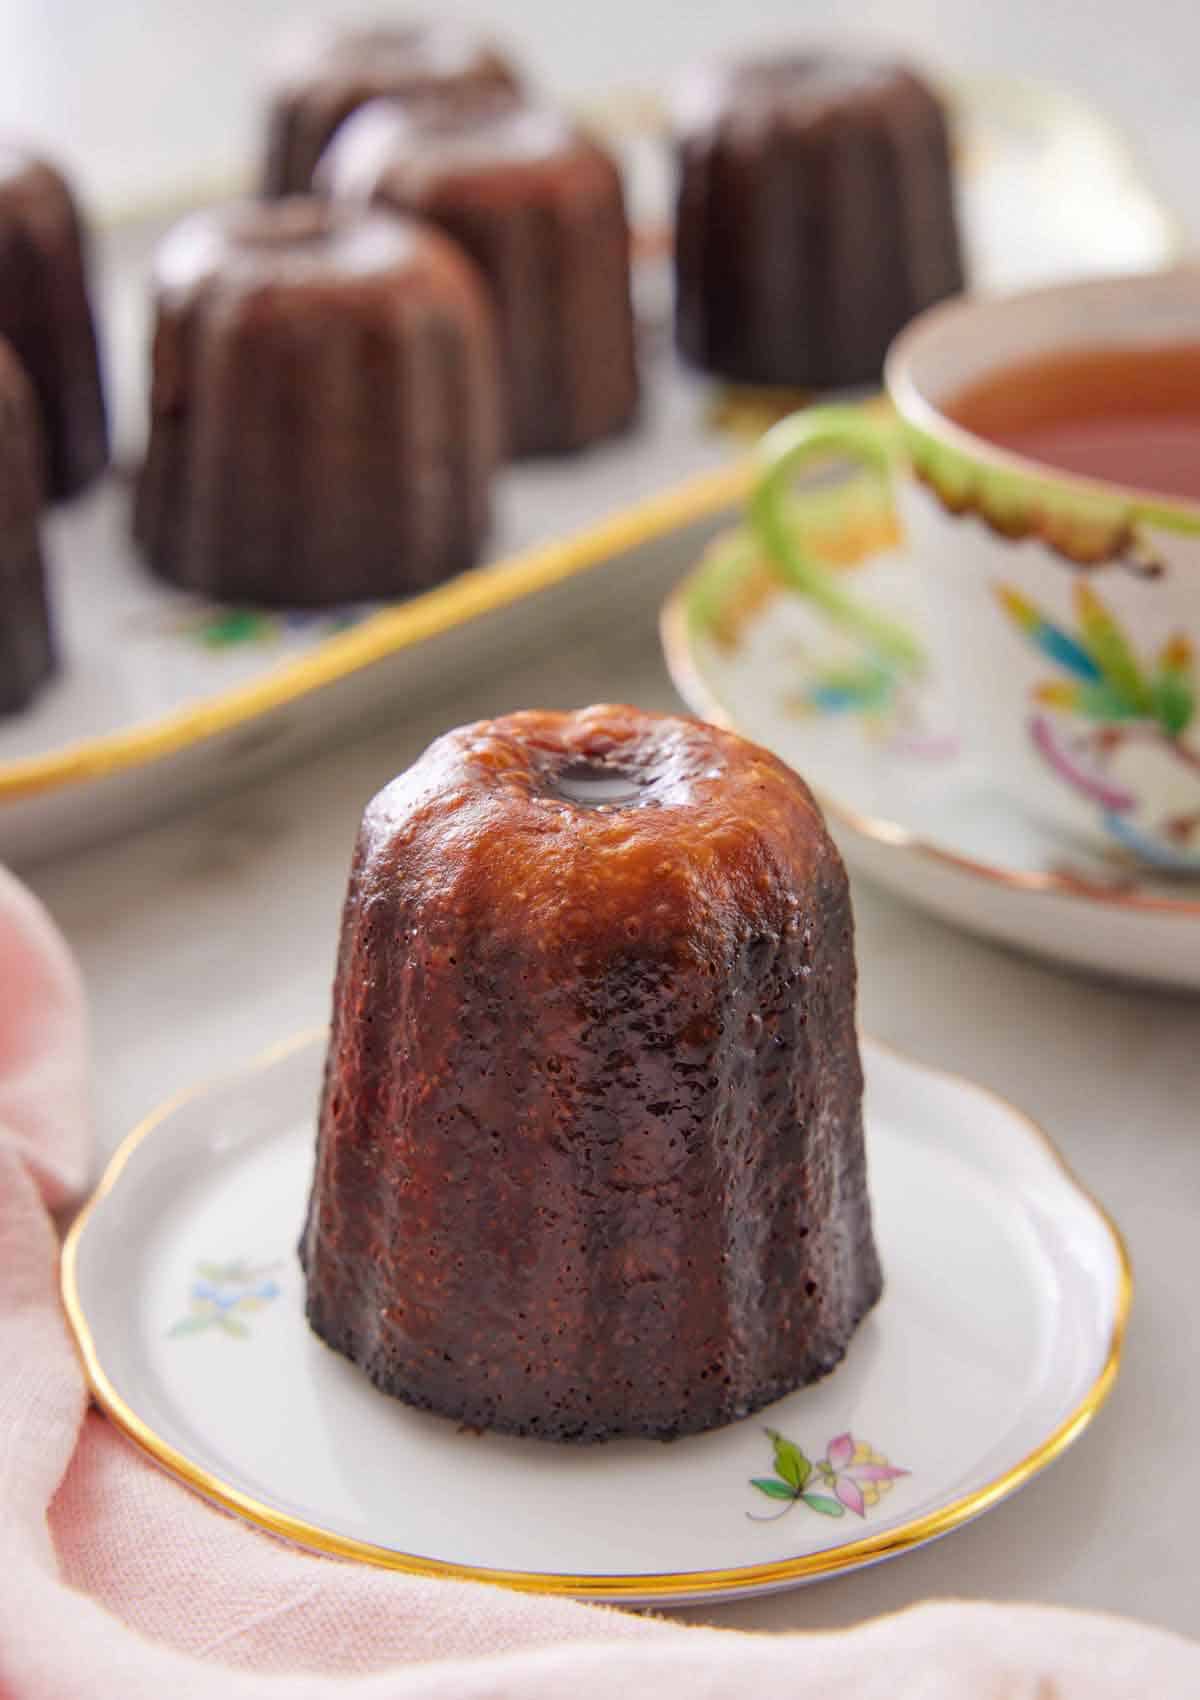 A canelé on a plate with more in a platter in the back along with a cup of tea.